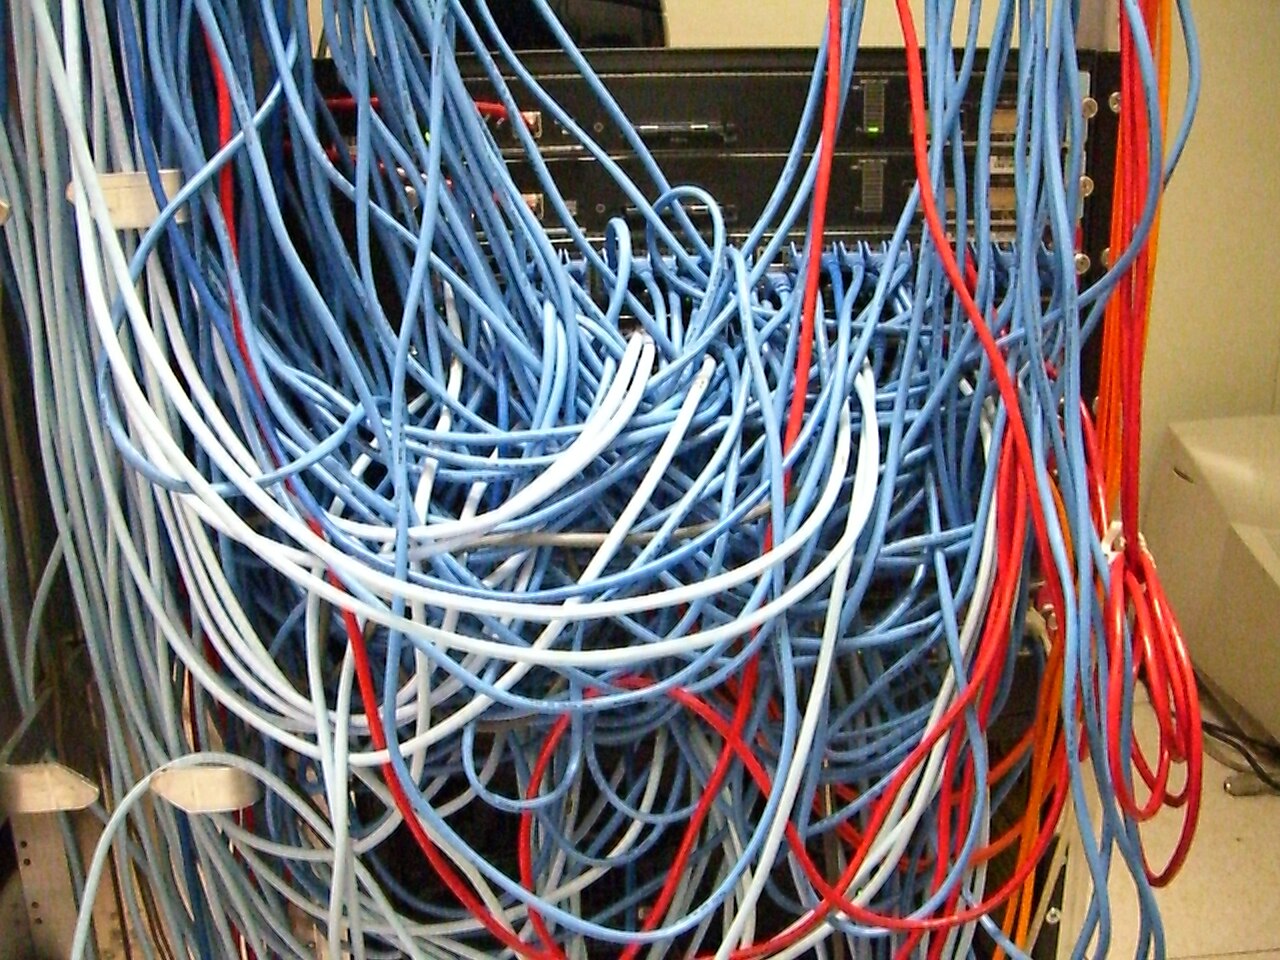 Network cables and server rack